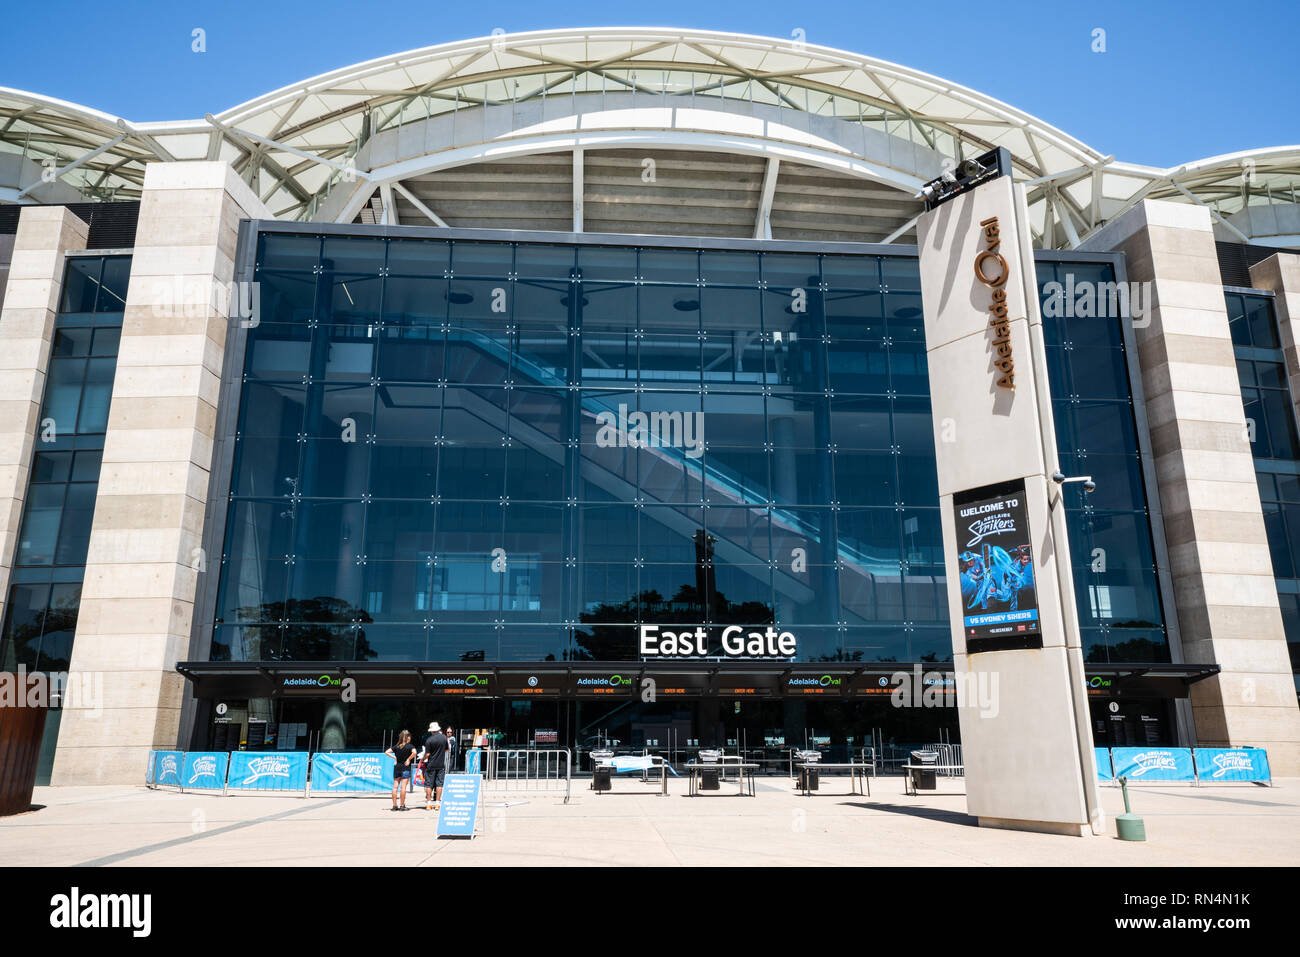 31st December 2018, Adelaide South Australia : Adelaide Oval sports ground stadium front view on east side with sign in Adelaide SA Australia Stock Photo